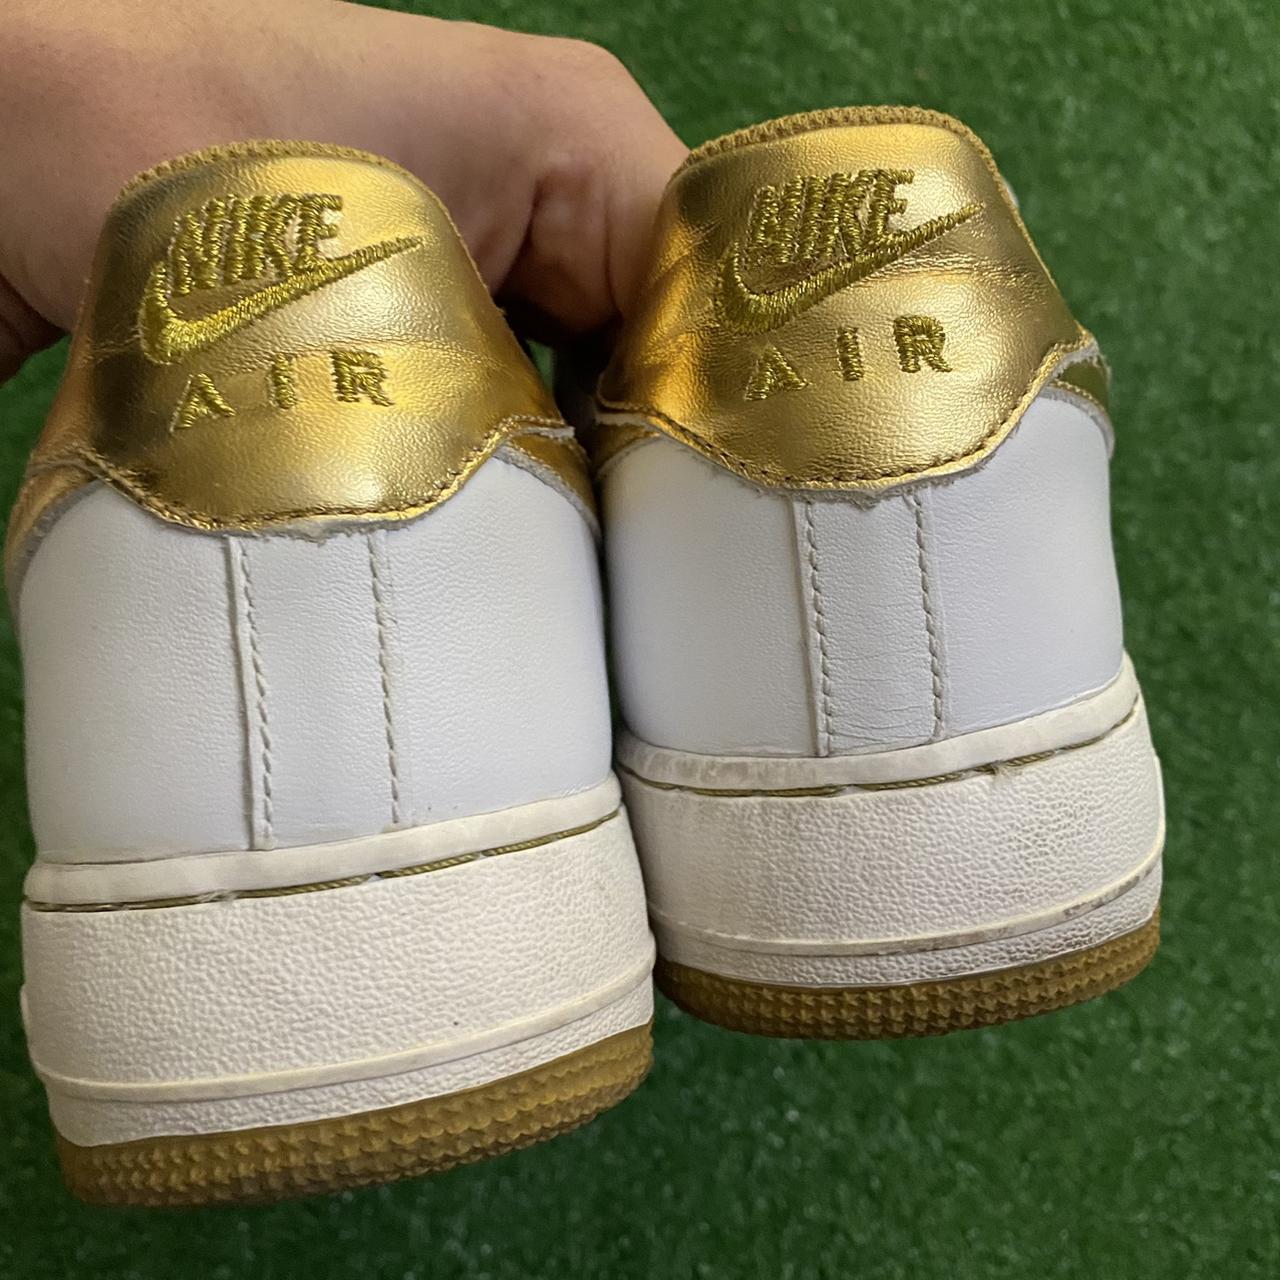 Size 12 Nike Air Force 1 '07 LV8 Gold Foil Swoosh White/Gold Olympic  Men's Shoes